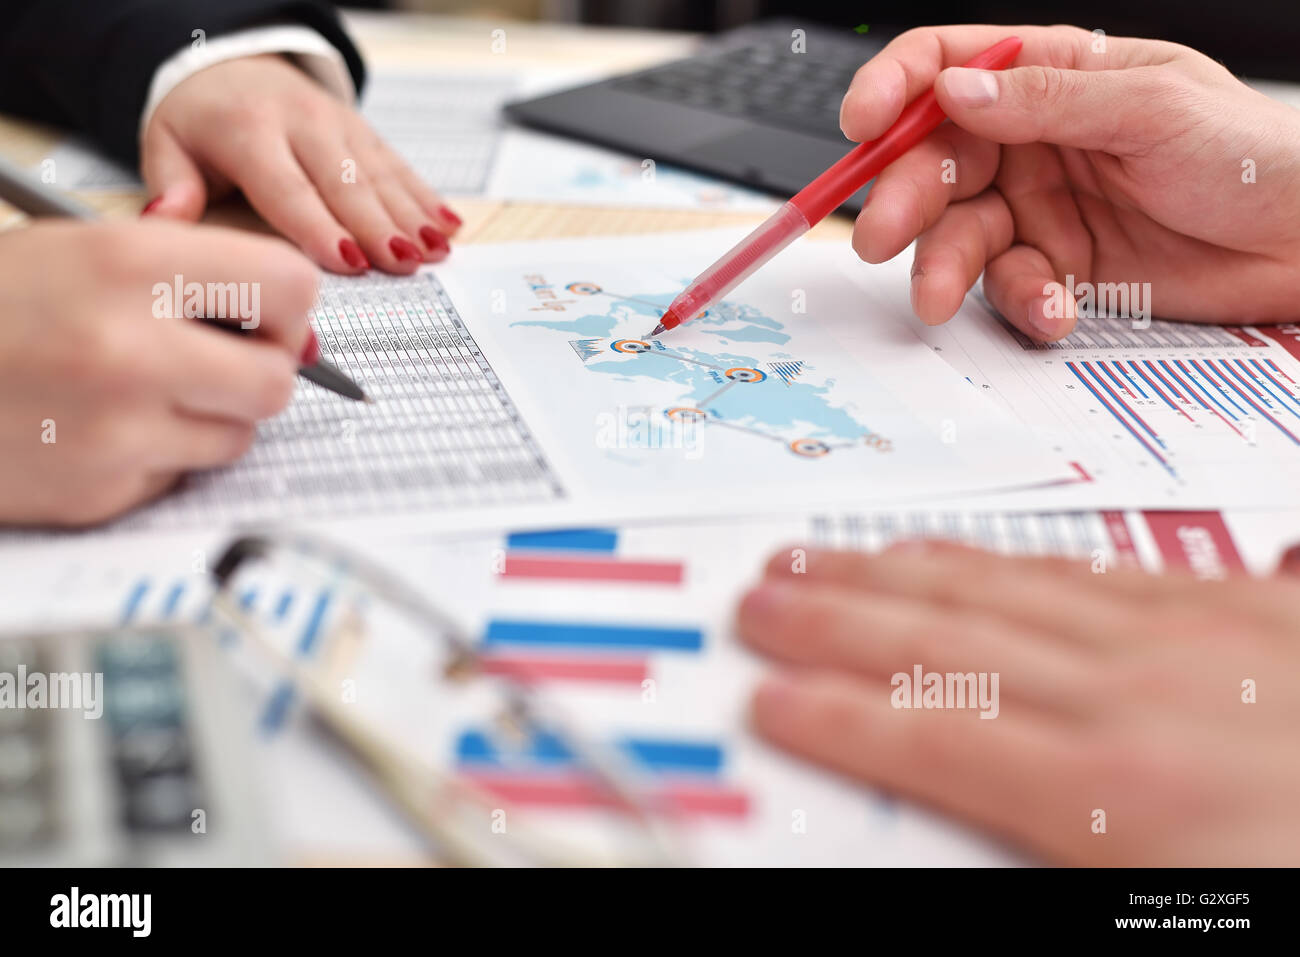 co worker hands during paperwork at meeting Stock Photo